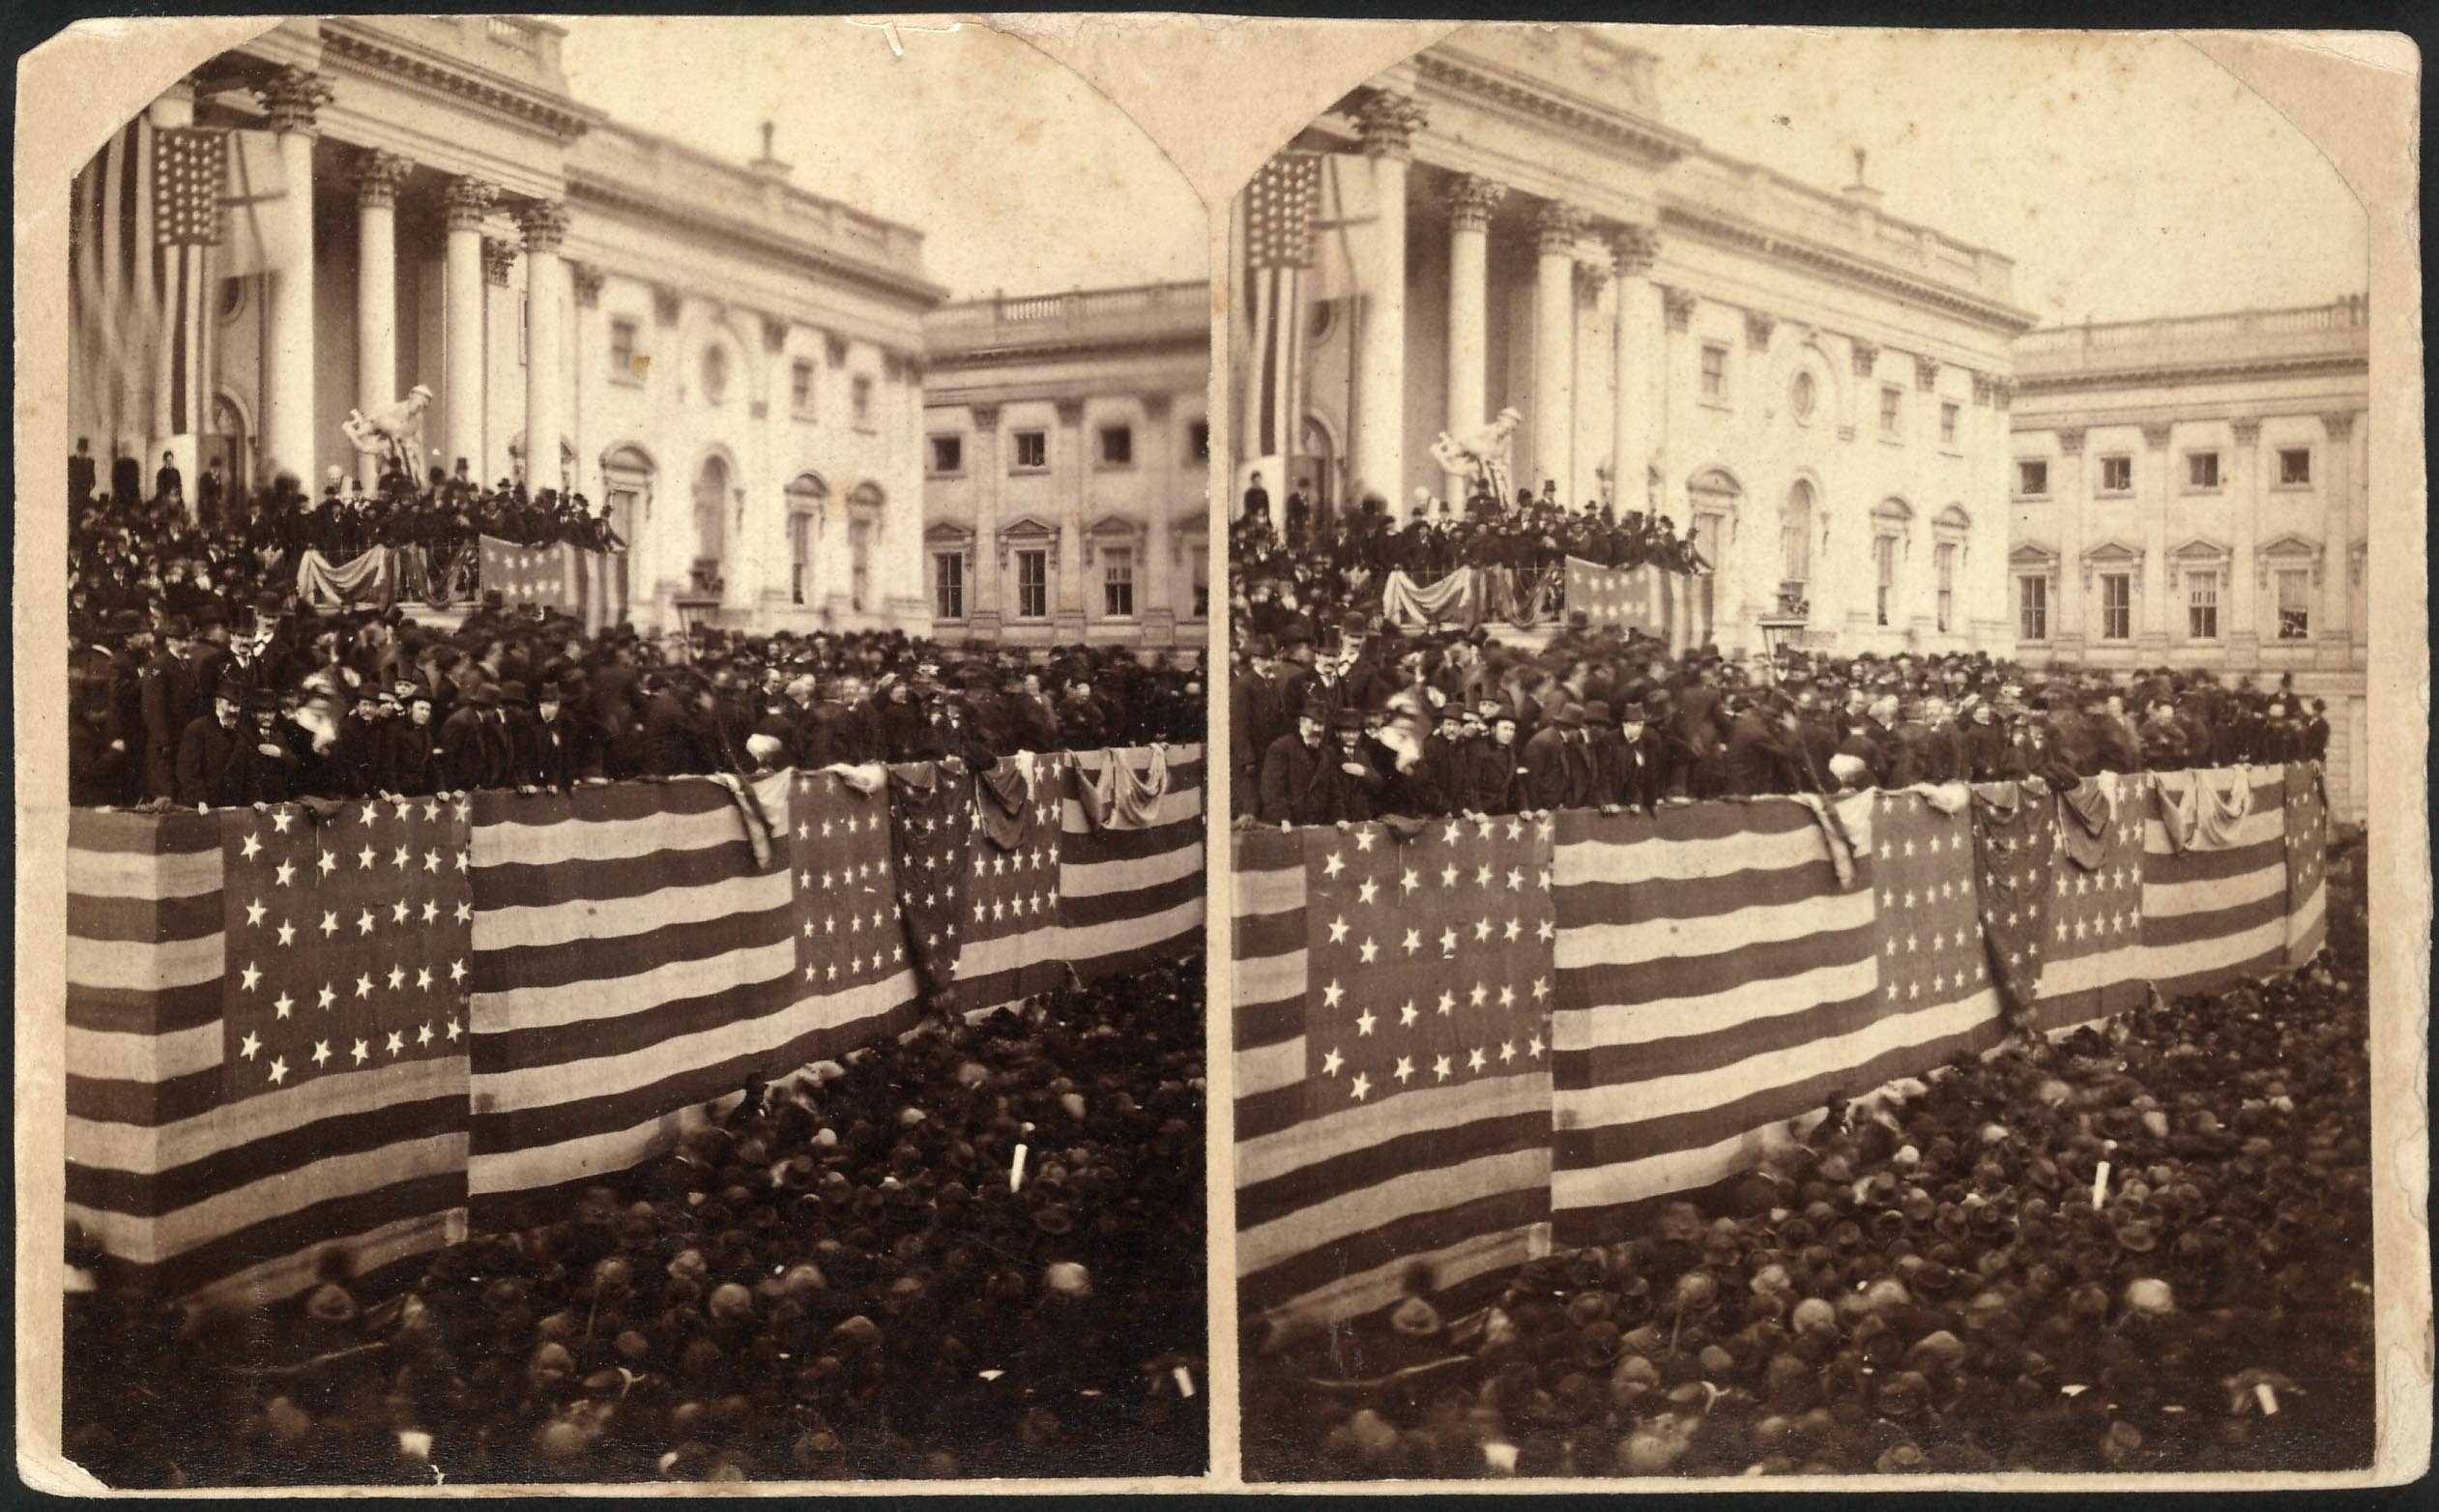 Stereograph photo shows Chief Justice Morrison R. Waite administers the oath of office to Rutherford B. Hayes on a flag-draped inaugural stand on the east portico of the U.S. Capitol, March 4, 1877.